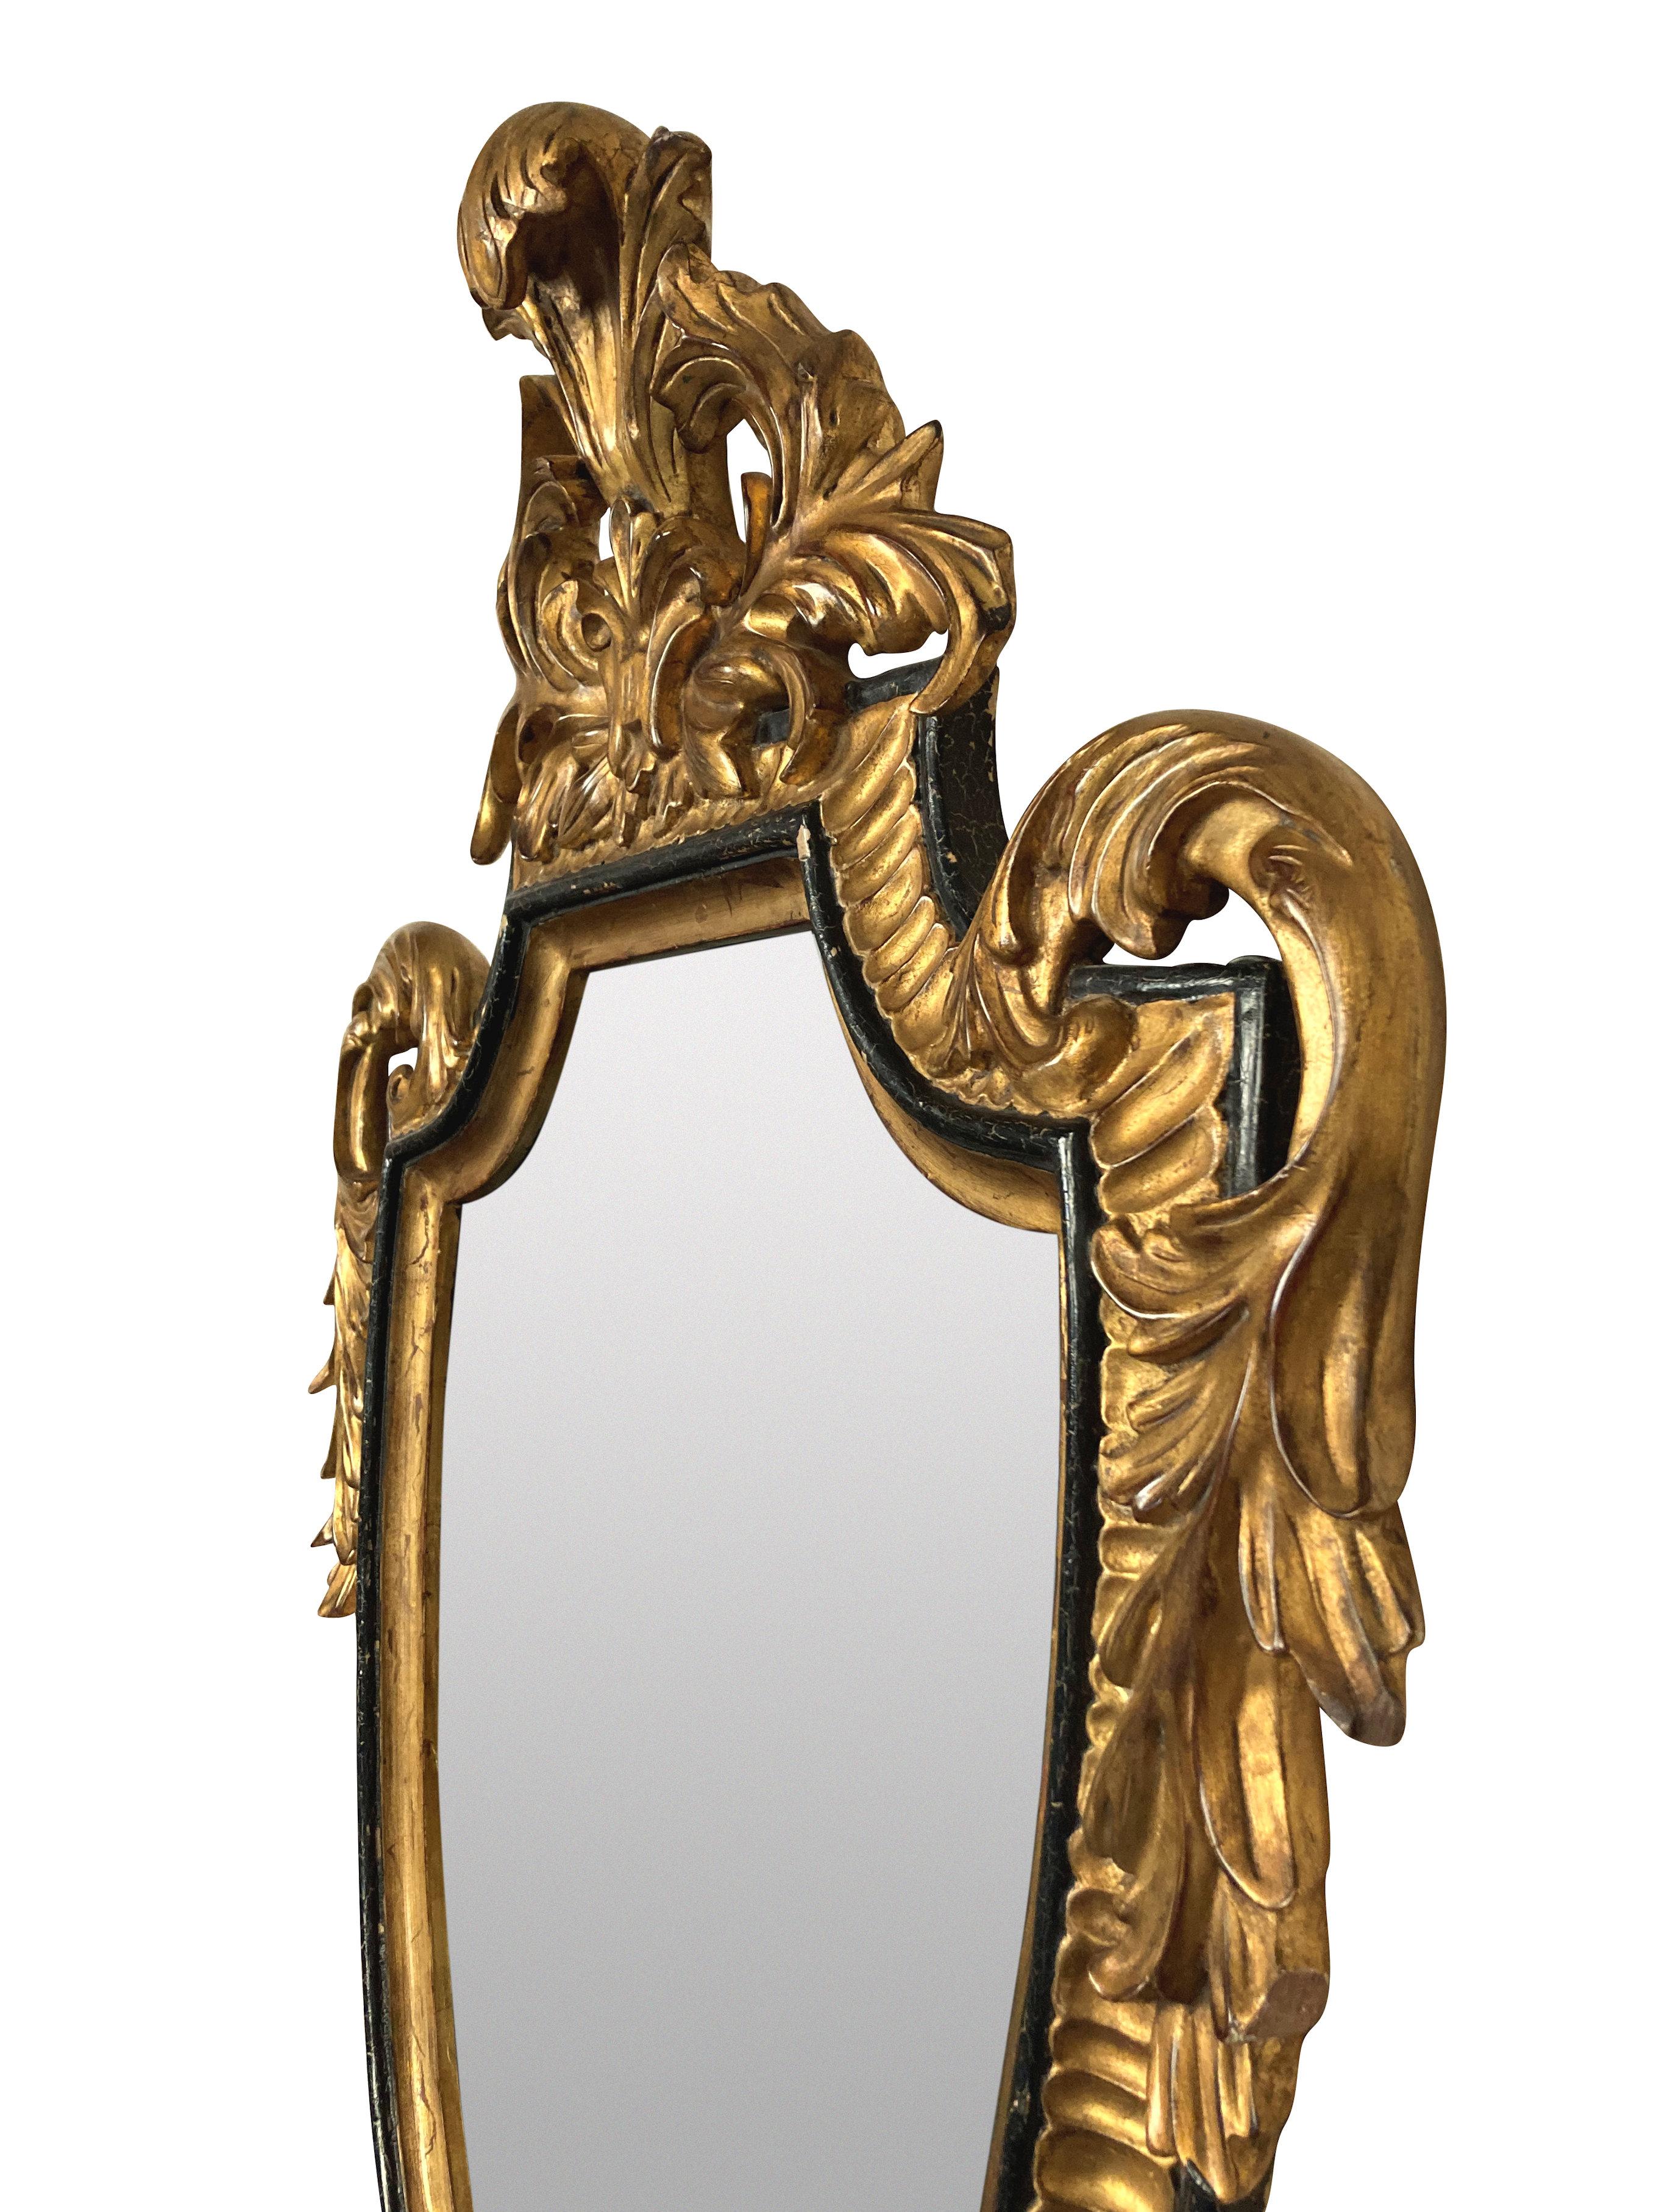 An American Louis XV style carved gilt wood and ebonised mirror by The Dauphine Mirror Co, West Palm Beach.

